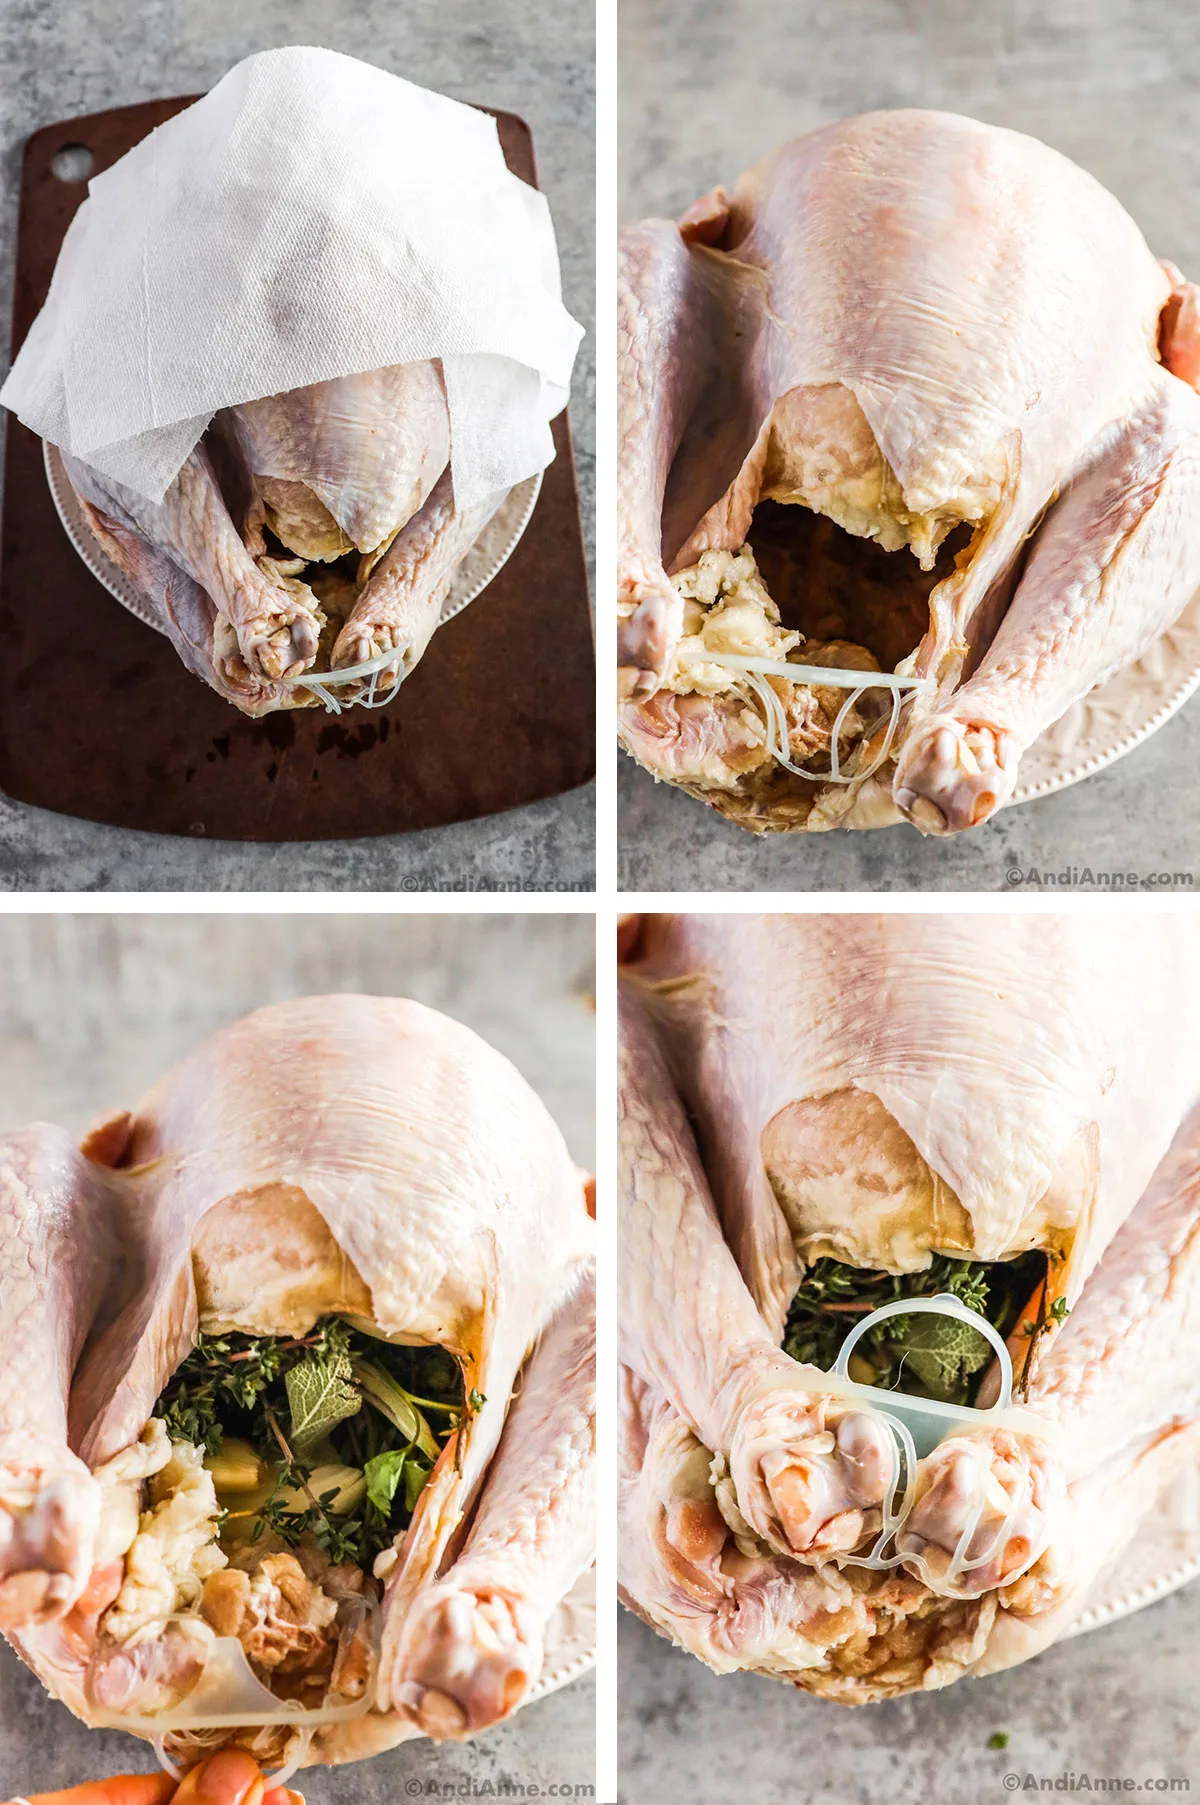 Four images of a raw turkey, first patted with paper towel, and then stuffed with herbs and onion, and legs tied together.